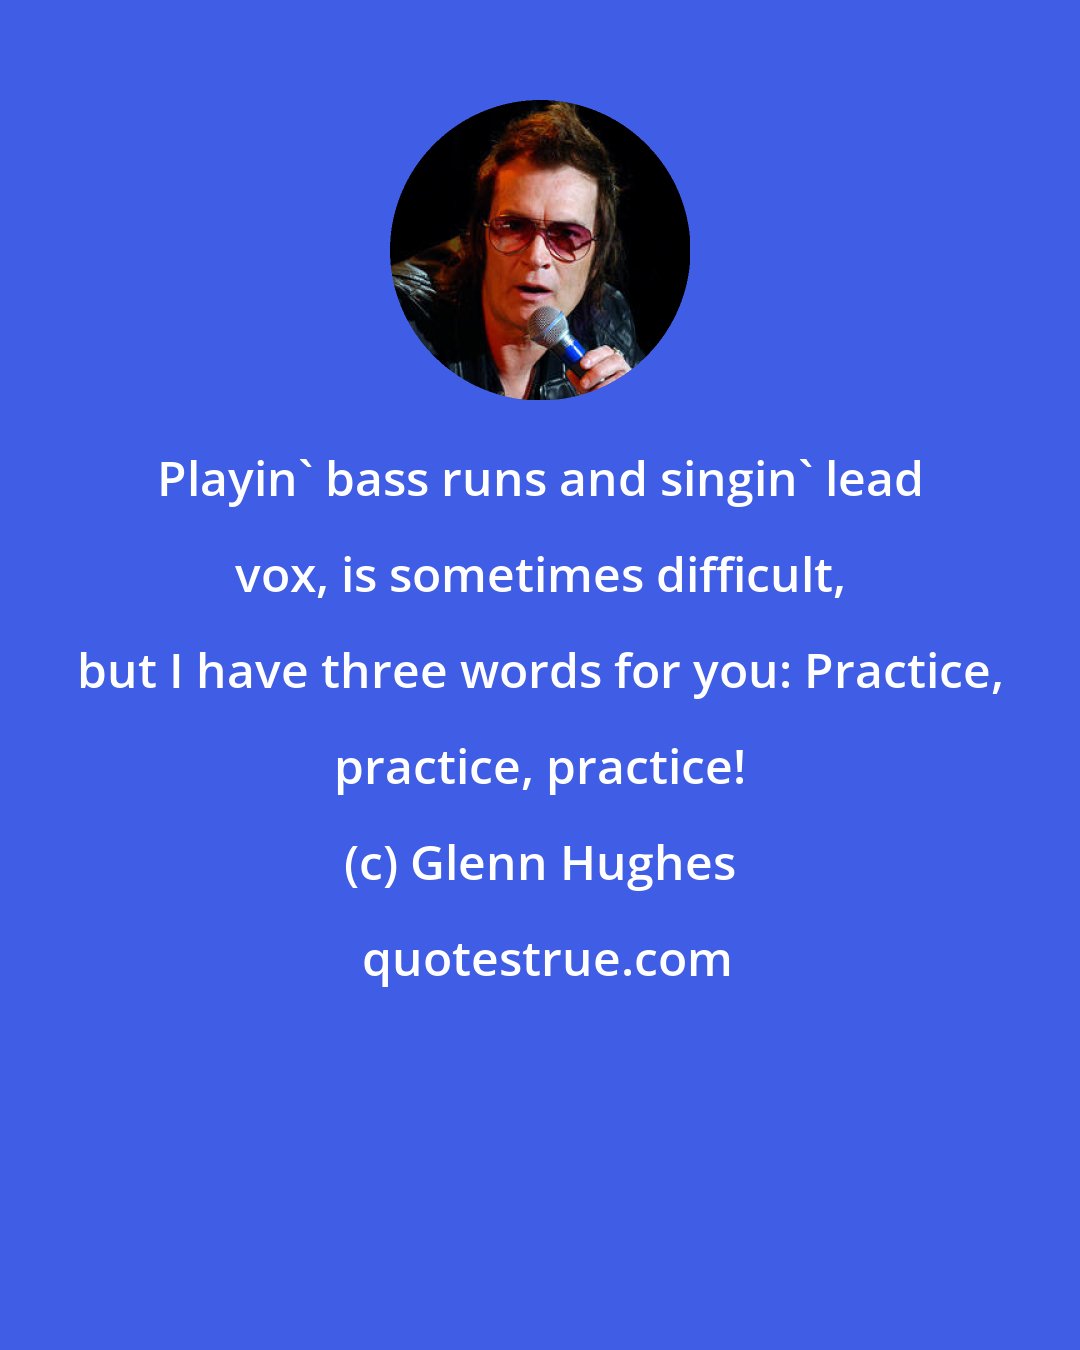 Glenn Hughes: Playin' bass runs and singin' lead vox, is sometimes difficult, but I have three words for you: Practice, practice, practice!